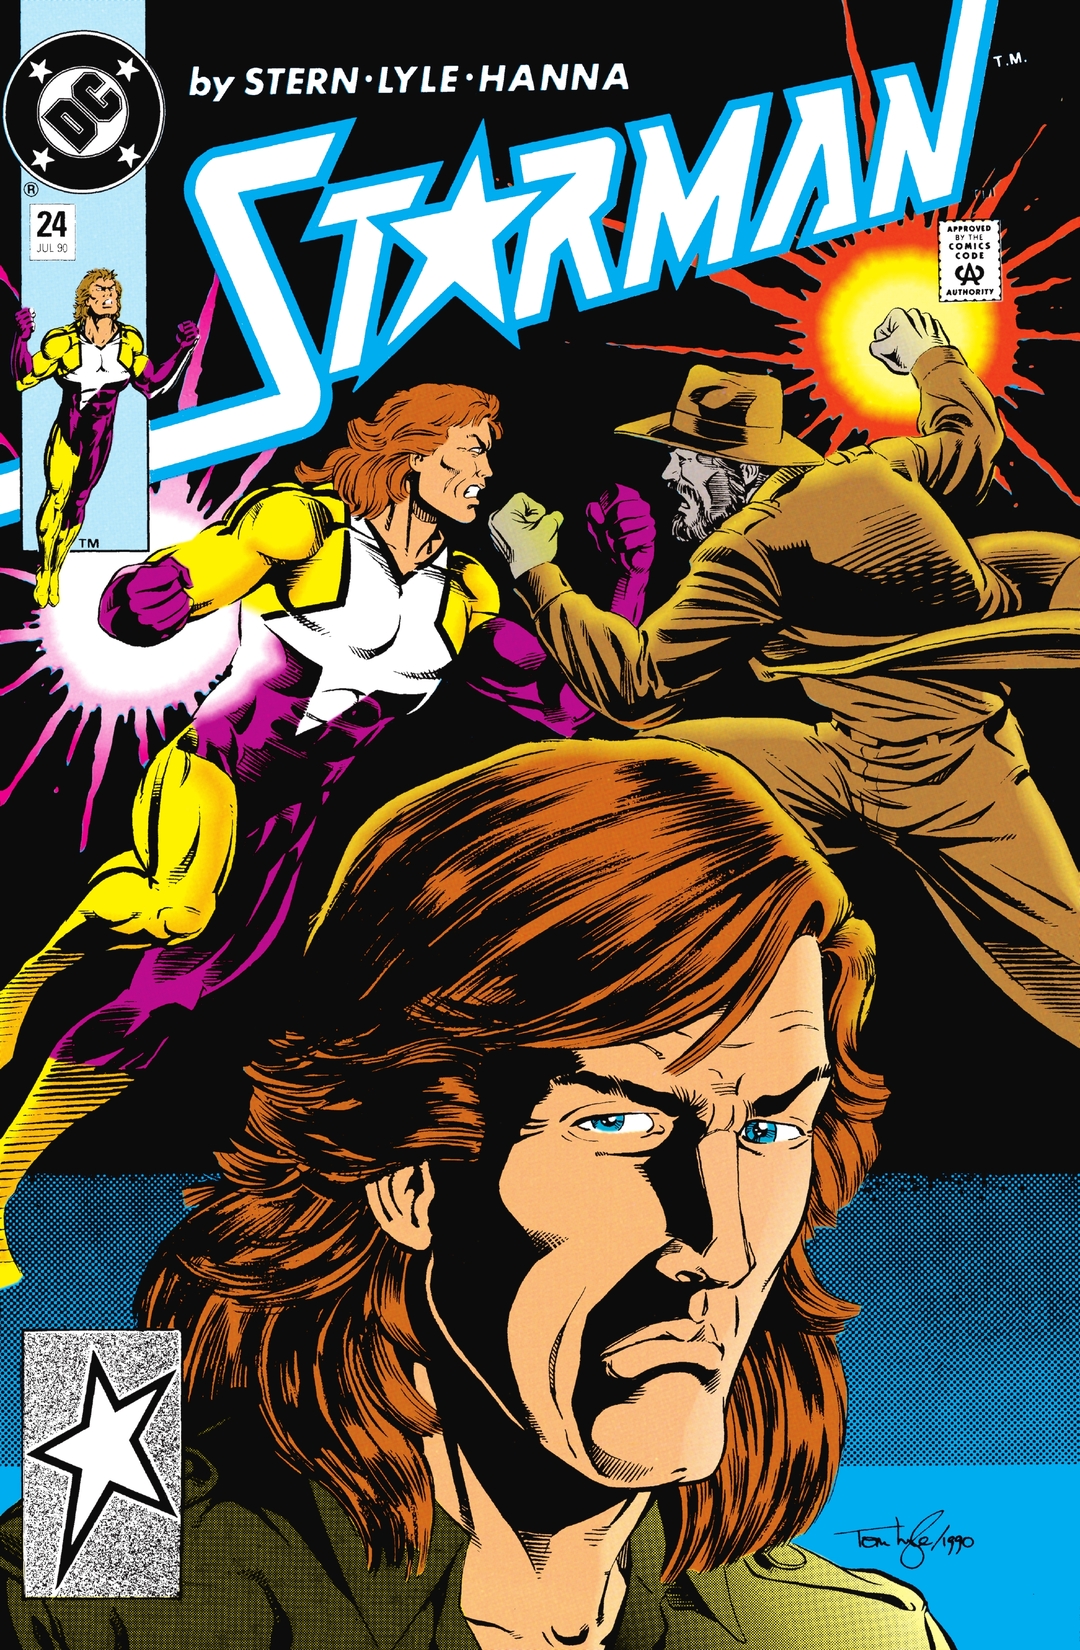 Starman (1988-) #24 preview images